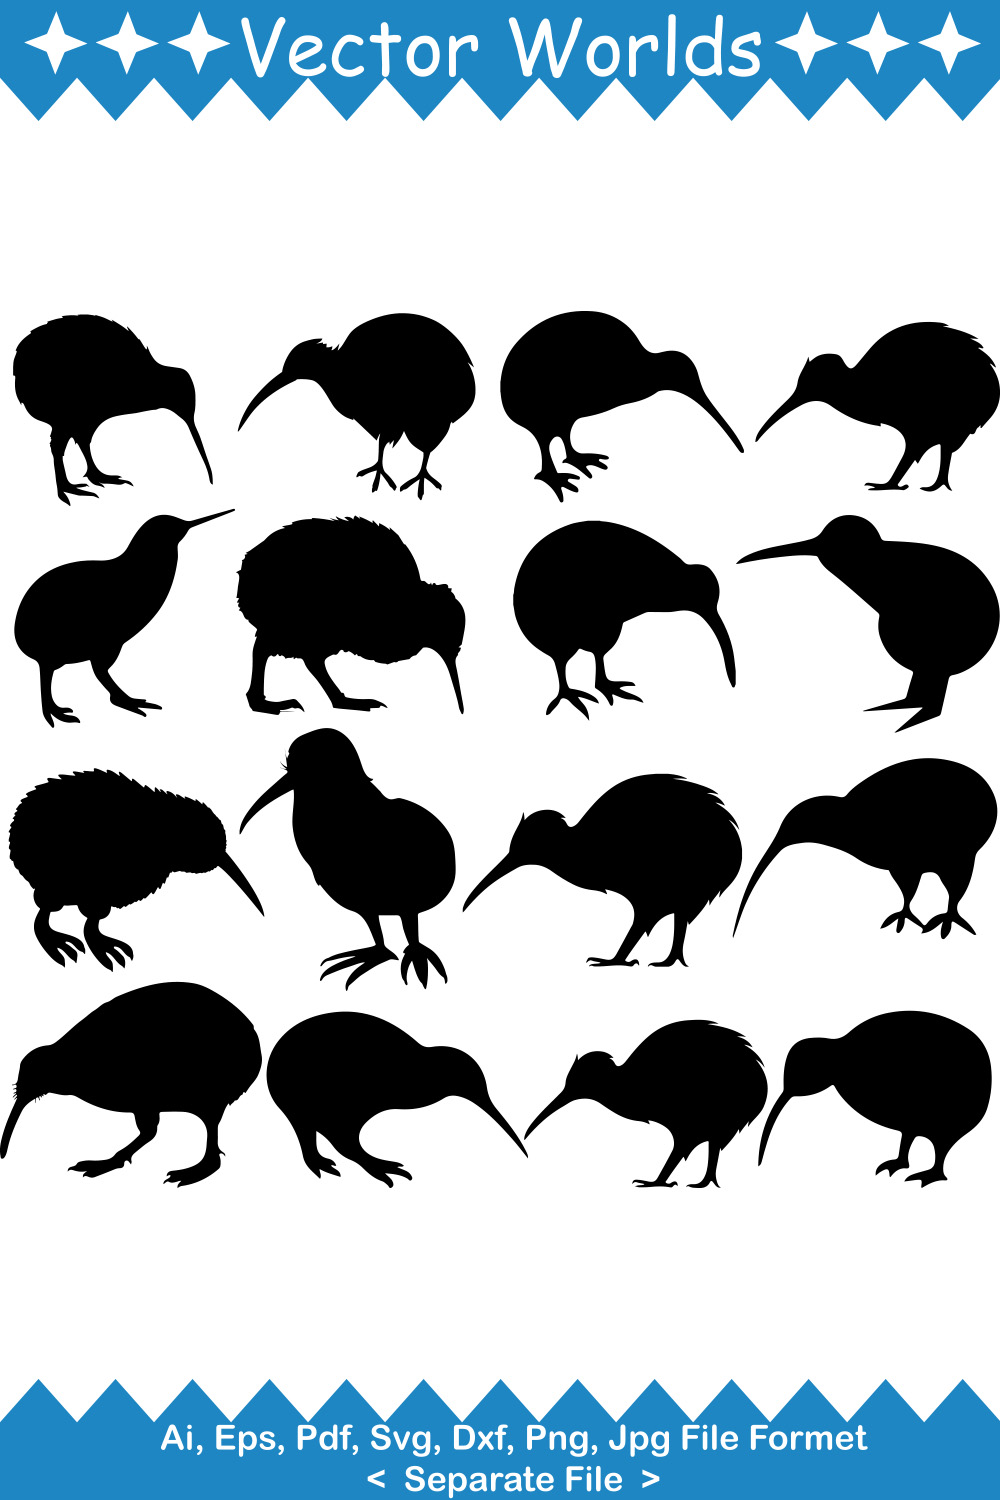 Set of silhouettes of different birds.